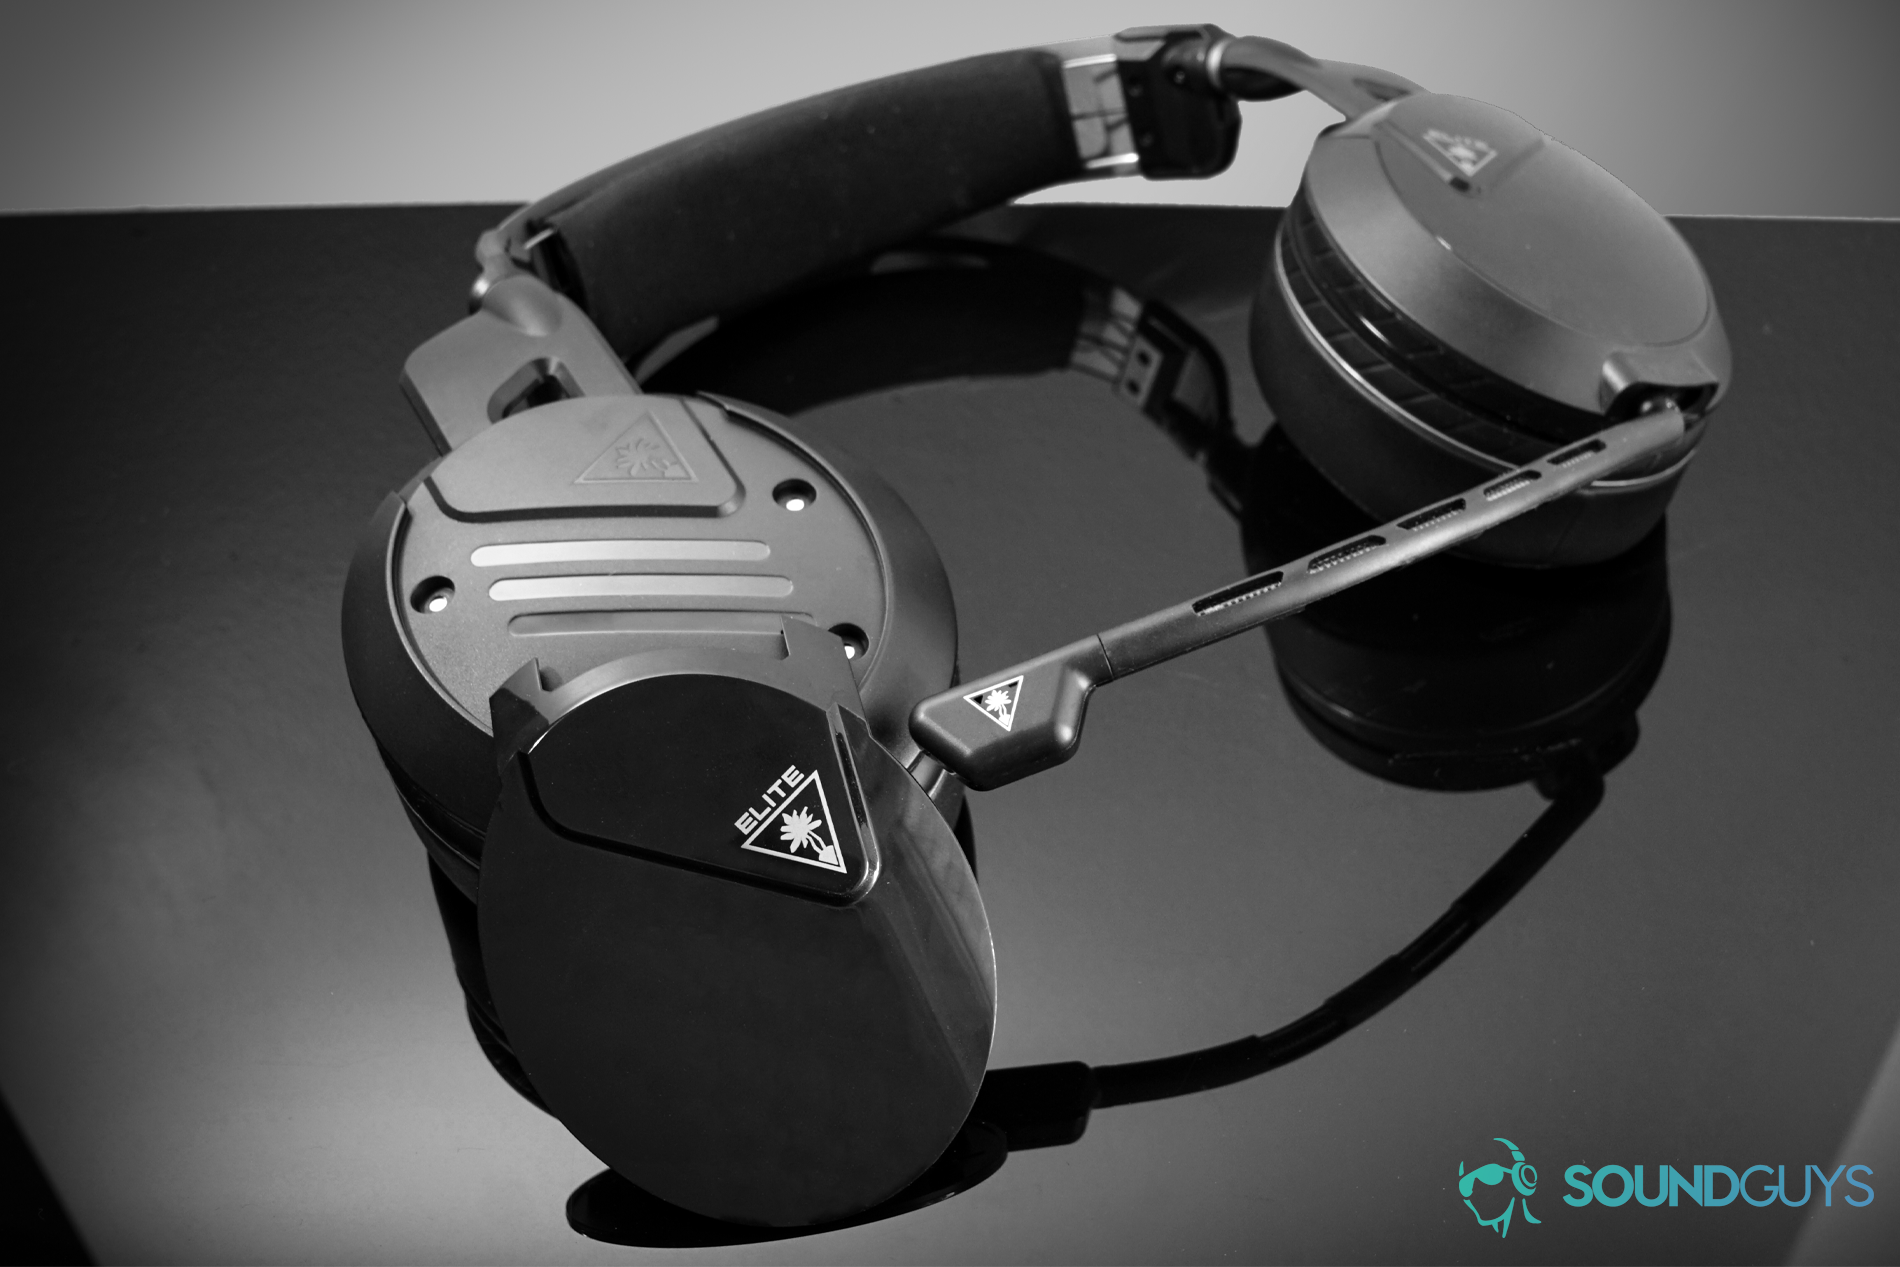 The Turtle Beach Elite Atlas gaming headset lays flat on a reflective black surface with its magnetic headphone plate detached.